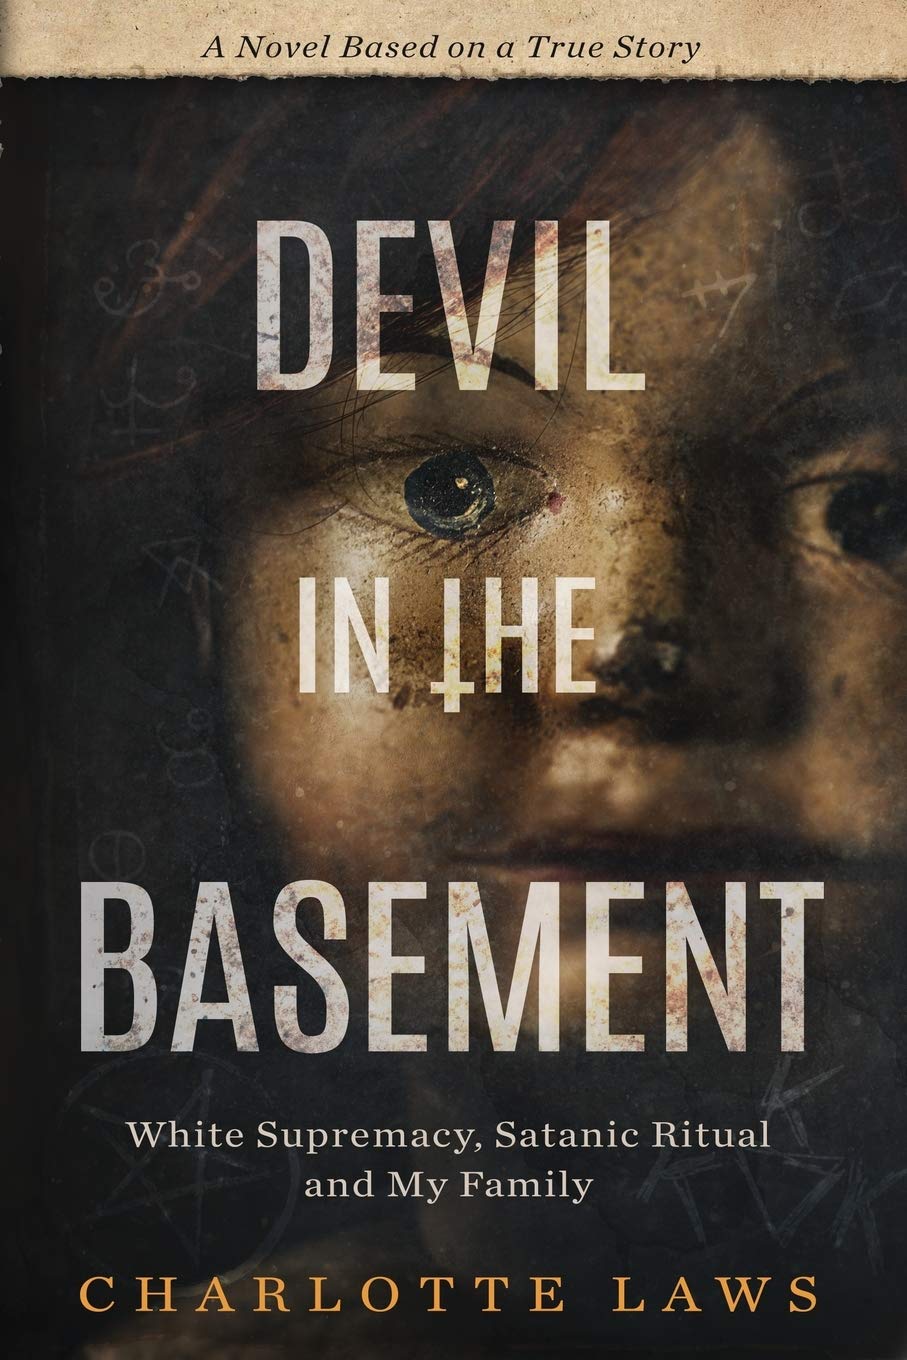 Devil in the Basement: White Supremacy, Satanic Ritual, and My Family